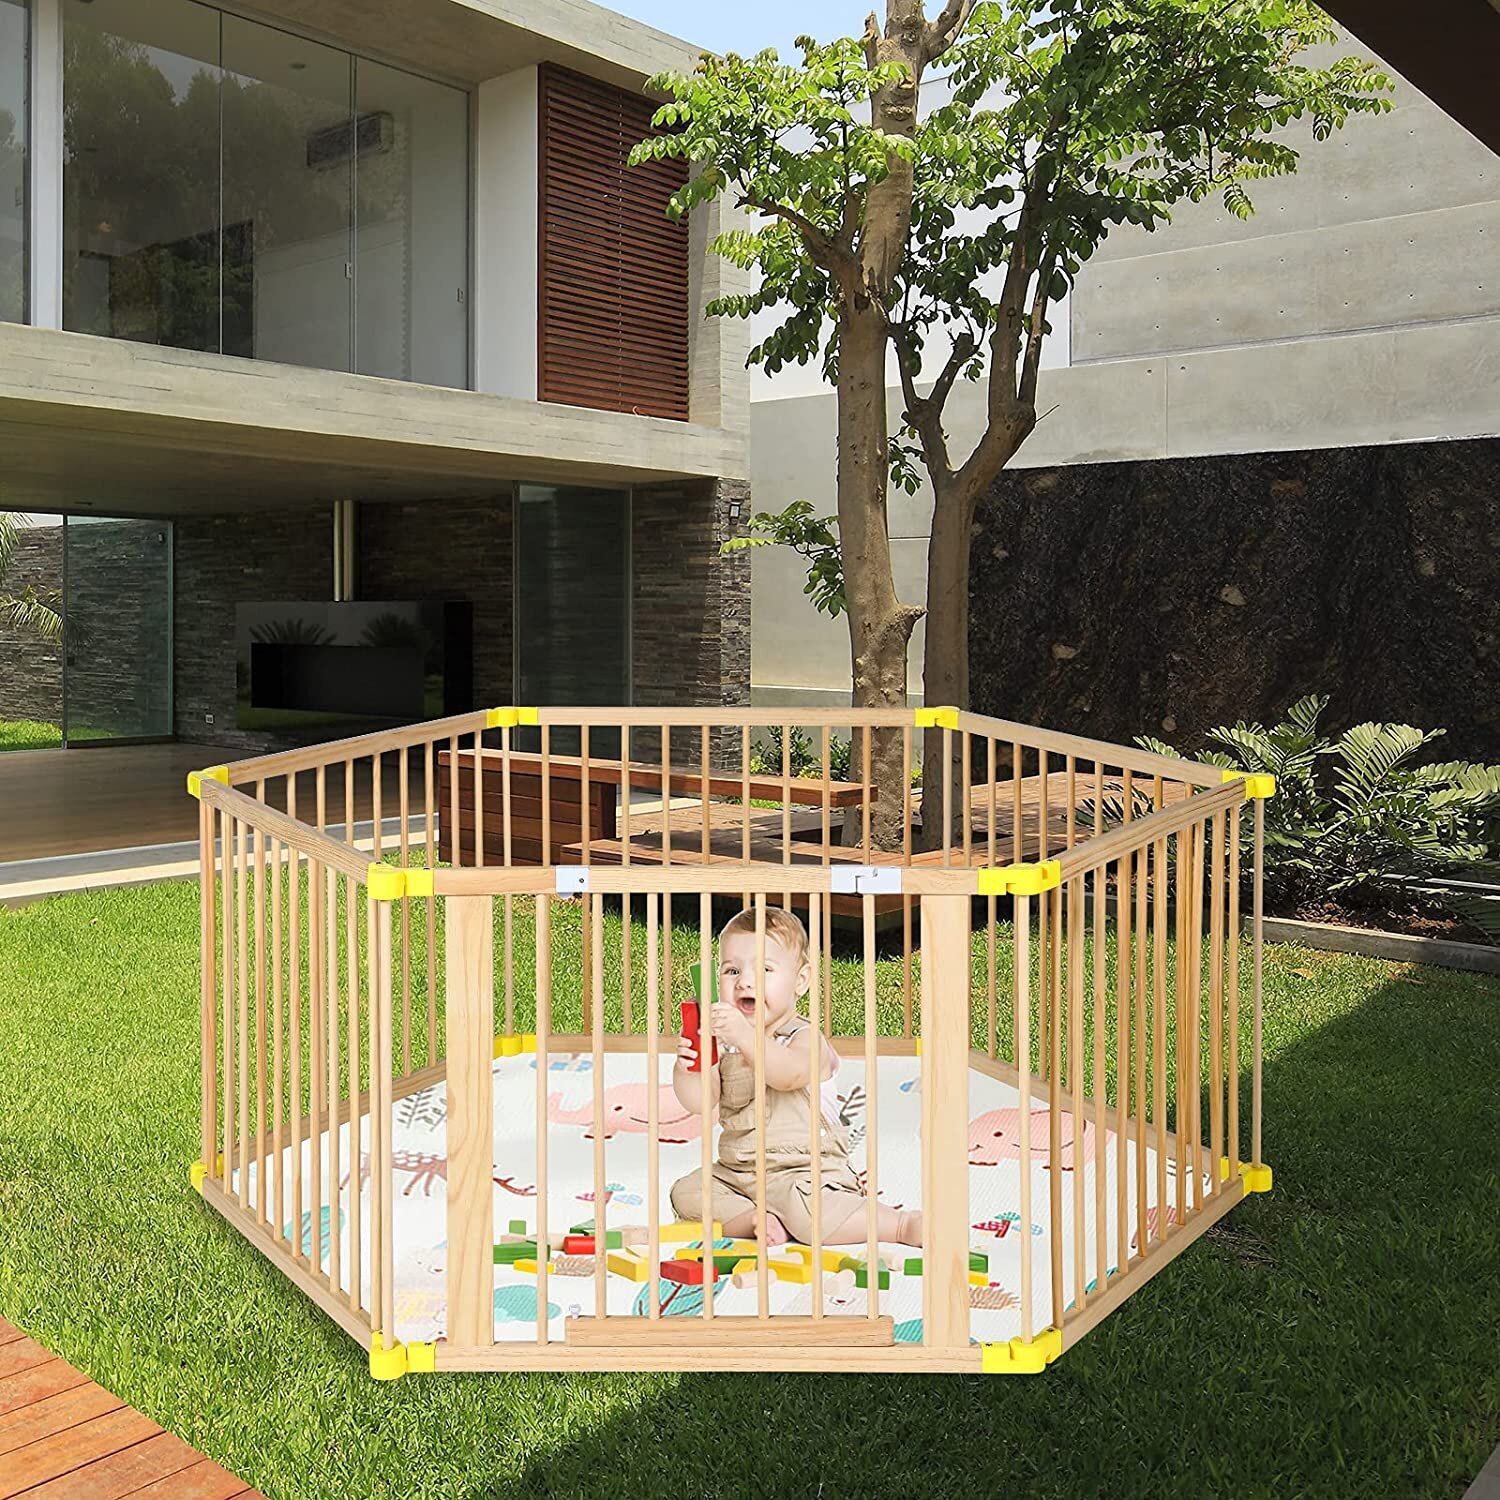 Large outdoor playpen for toddlers with fun yellow accents